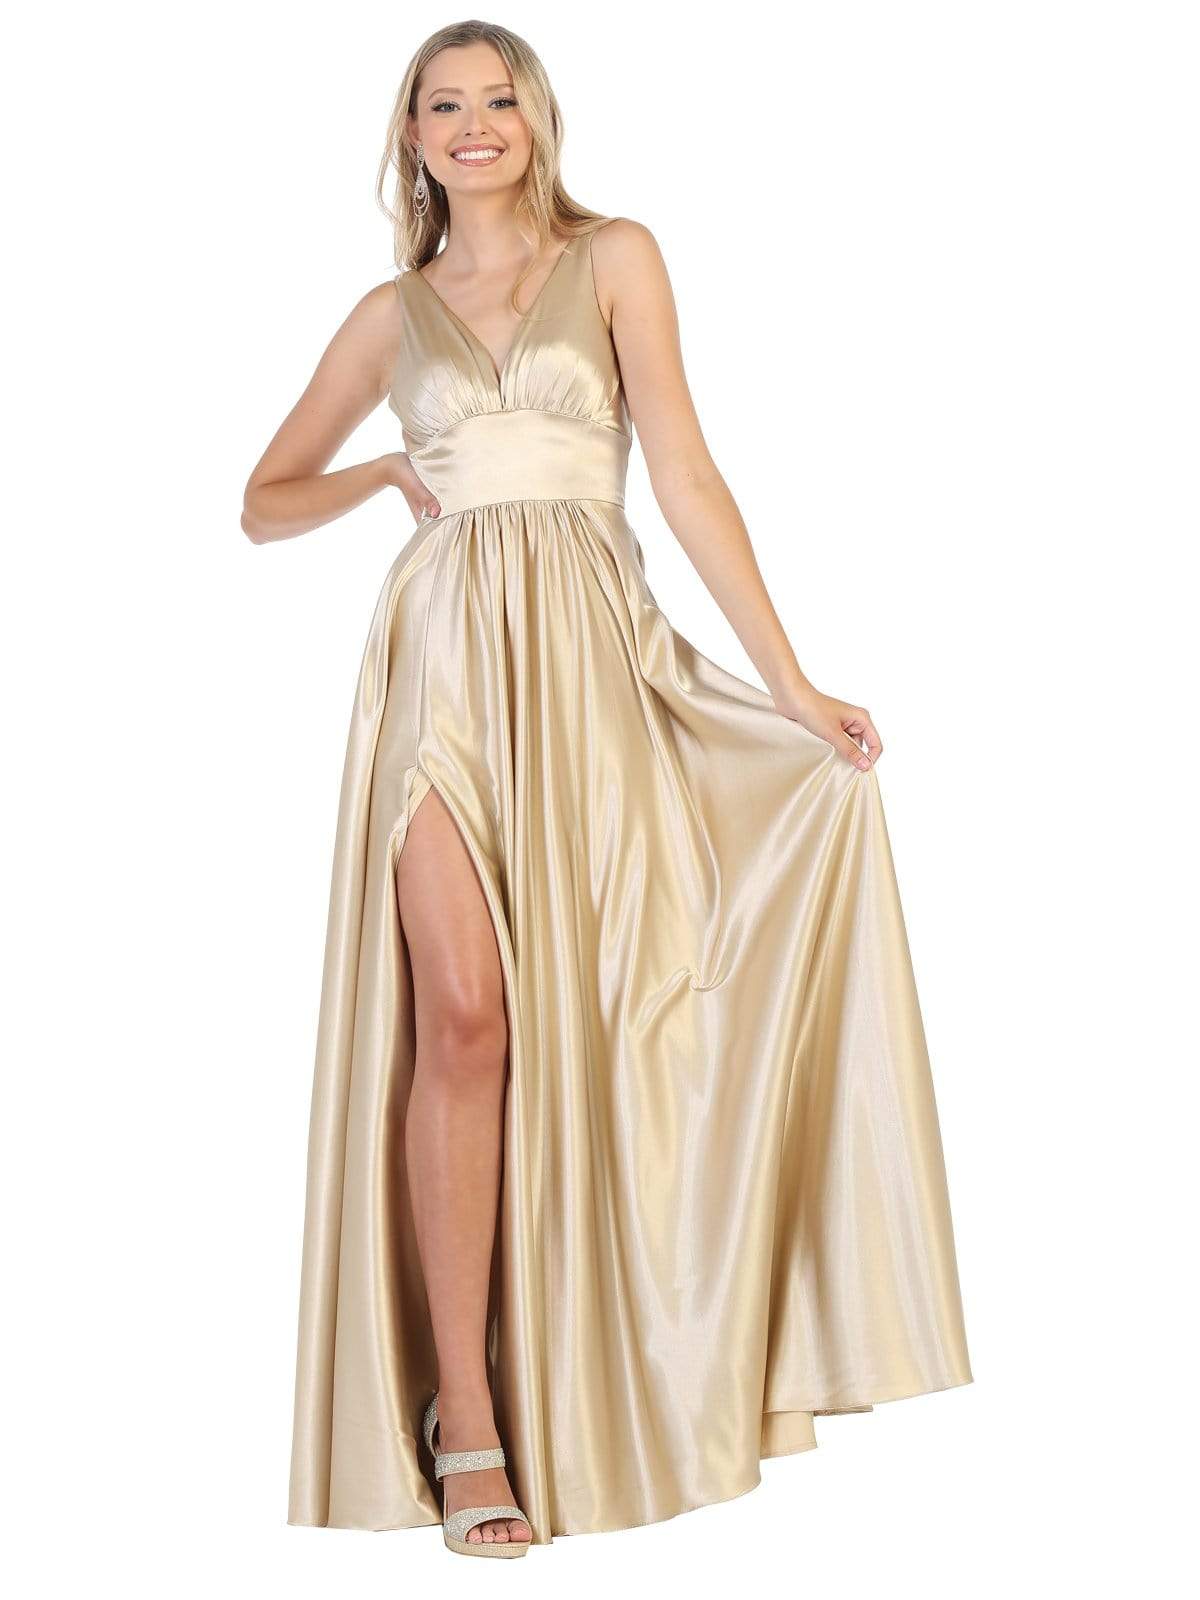 May Queen - MQ1723 Plunging V-Neck Empire High Slit Dress Evening Dresses 4 / Champagne